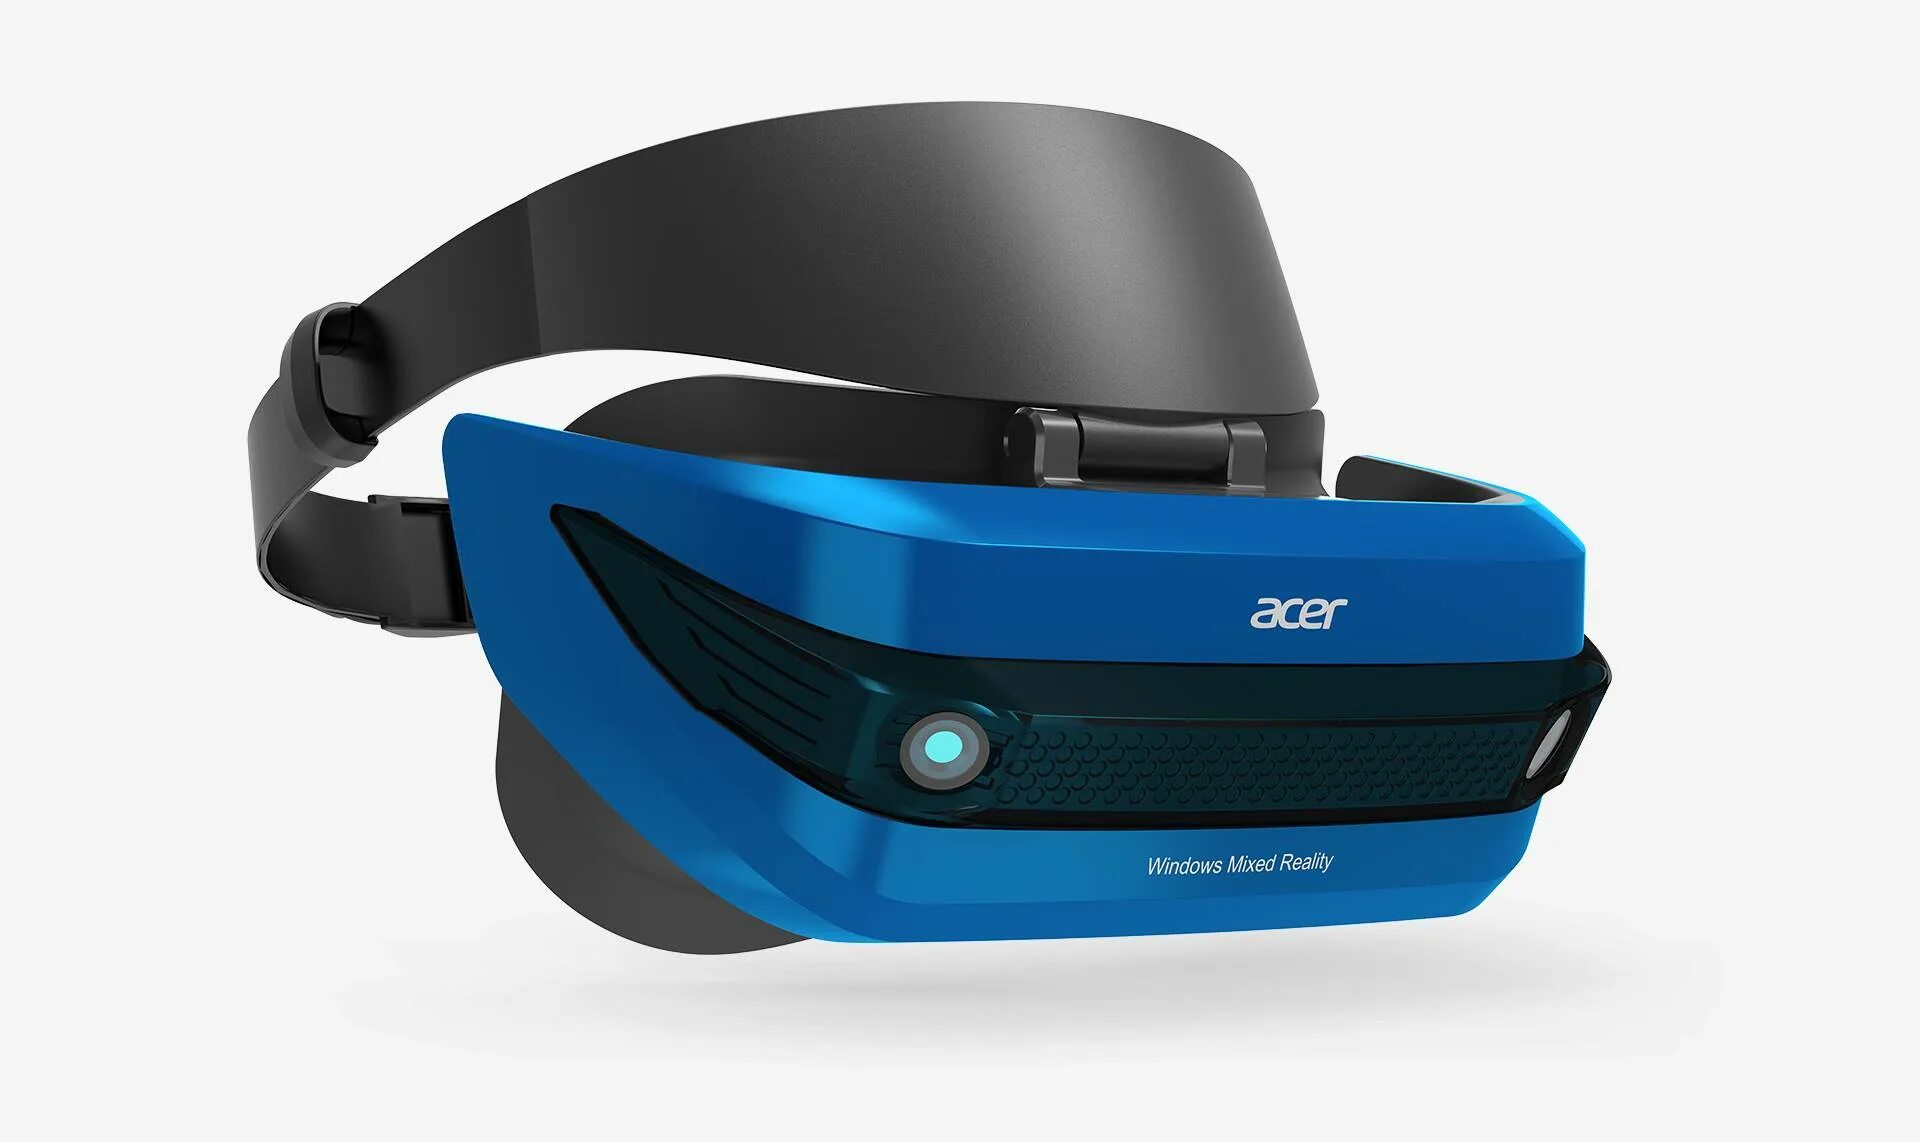 Acer Windows Mixed reality Headset. VR Acer Windows Mixed reality Headset. Acer WMR Headset (ah101). Samsung HMD Odyssey + - Windows Mixed reality Headset.